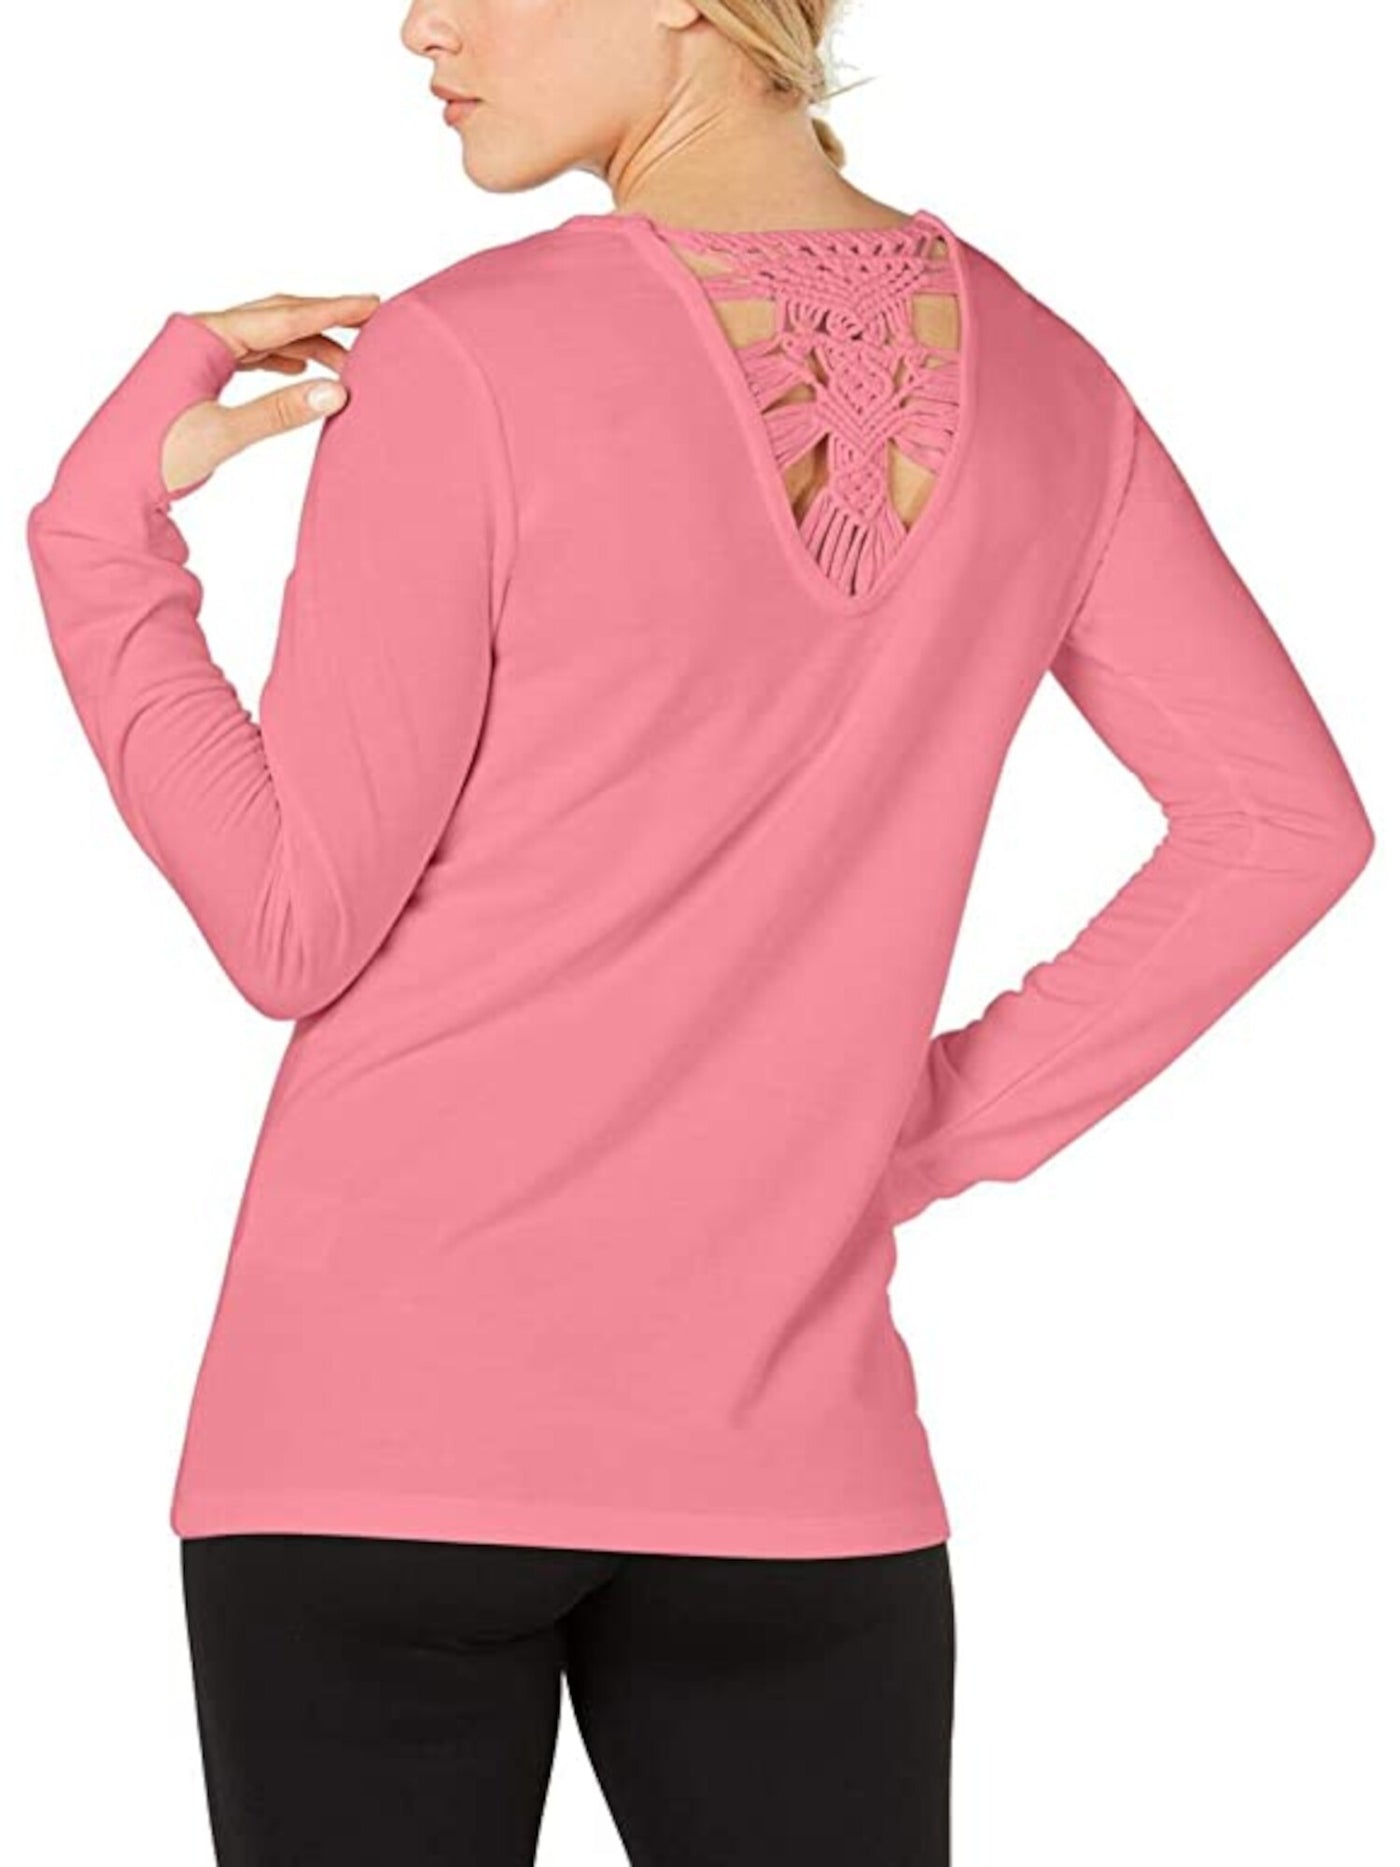 IDEOLOGY Womens Pink Long Sleeve Scoop Neck Top Size: M